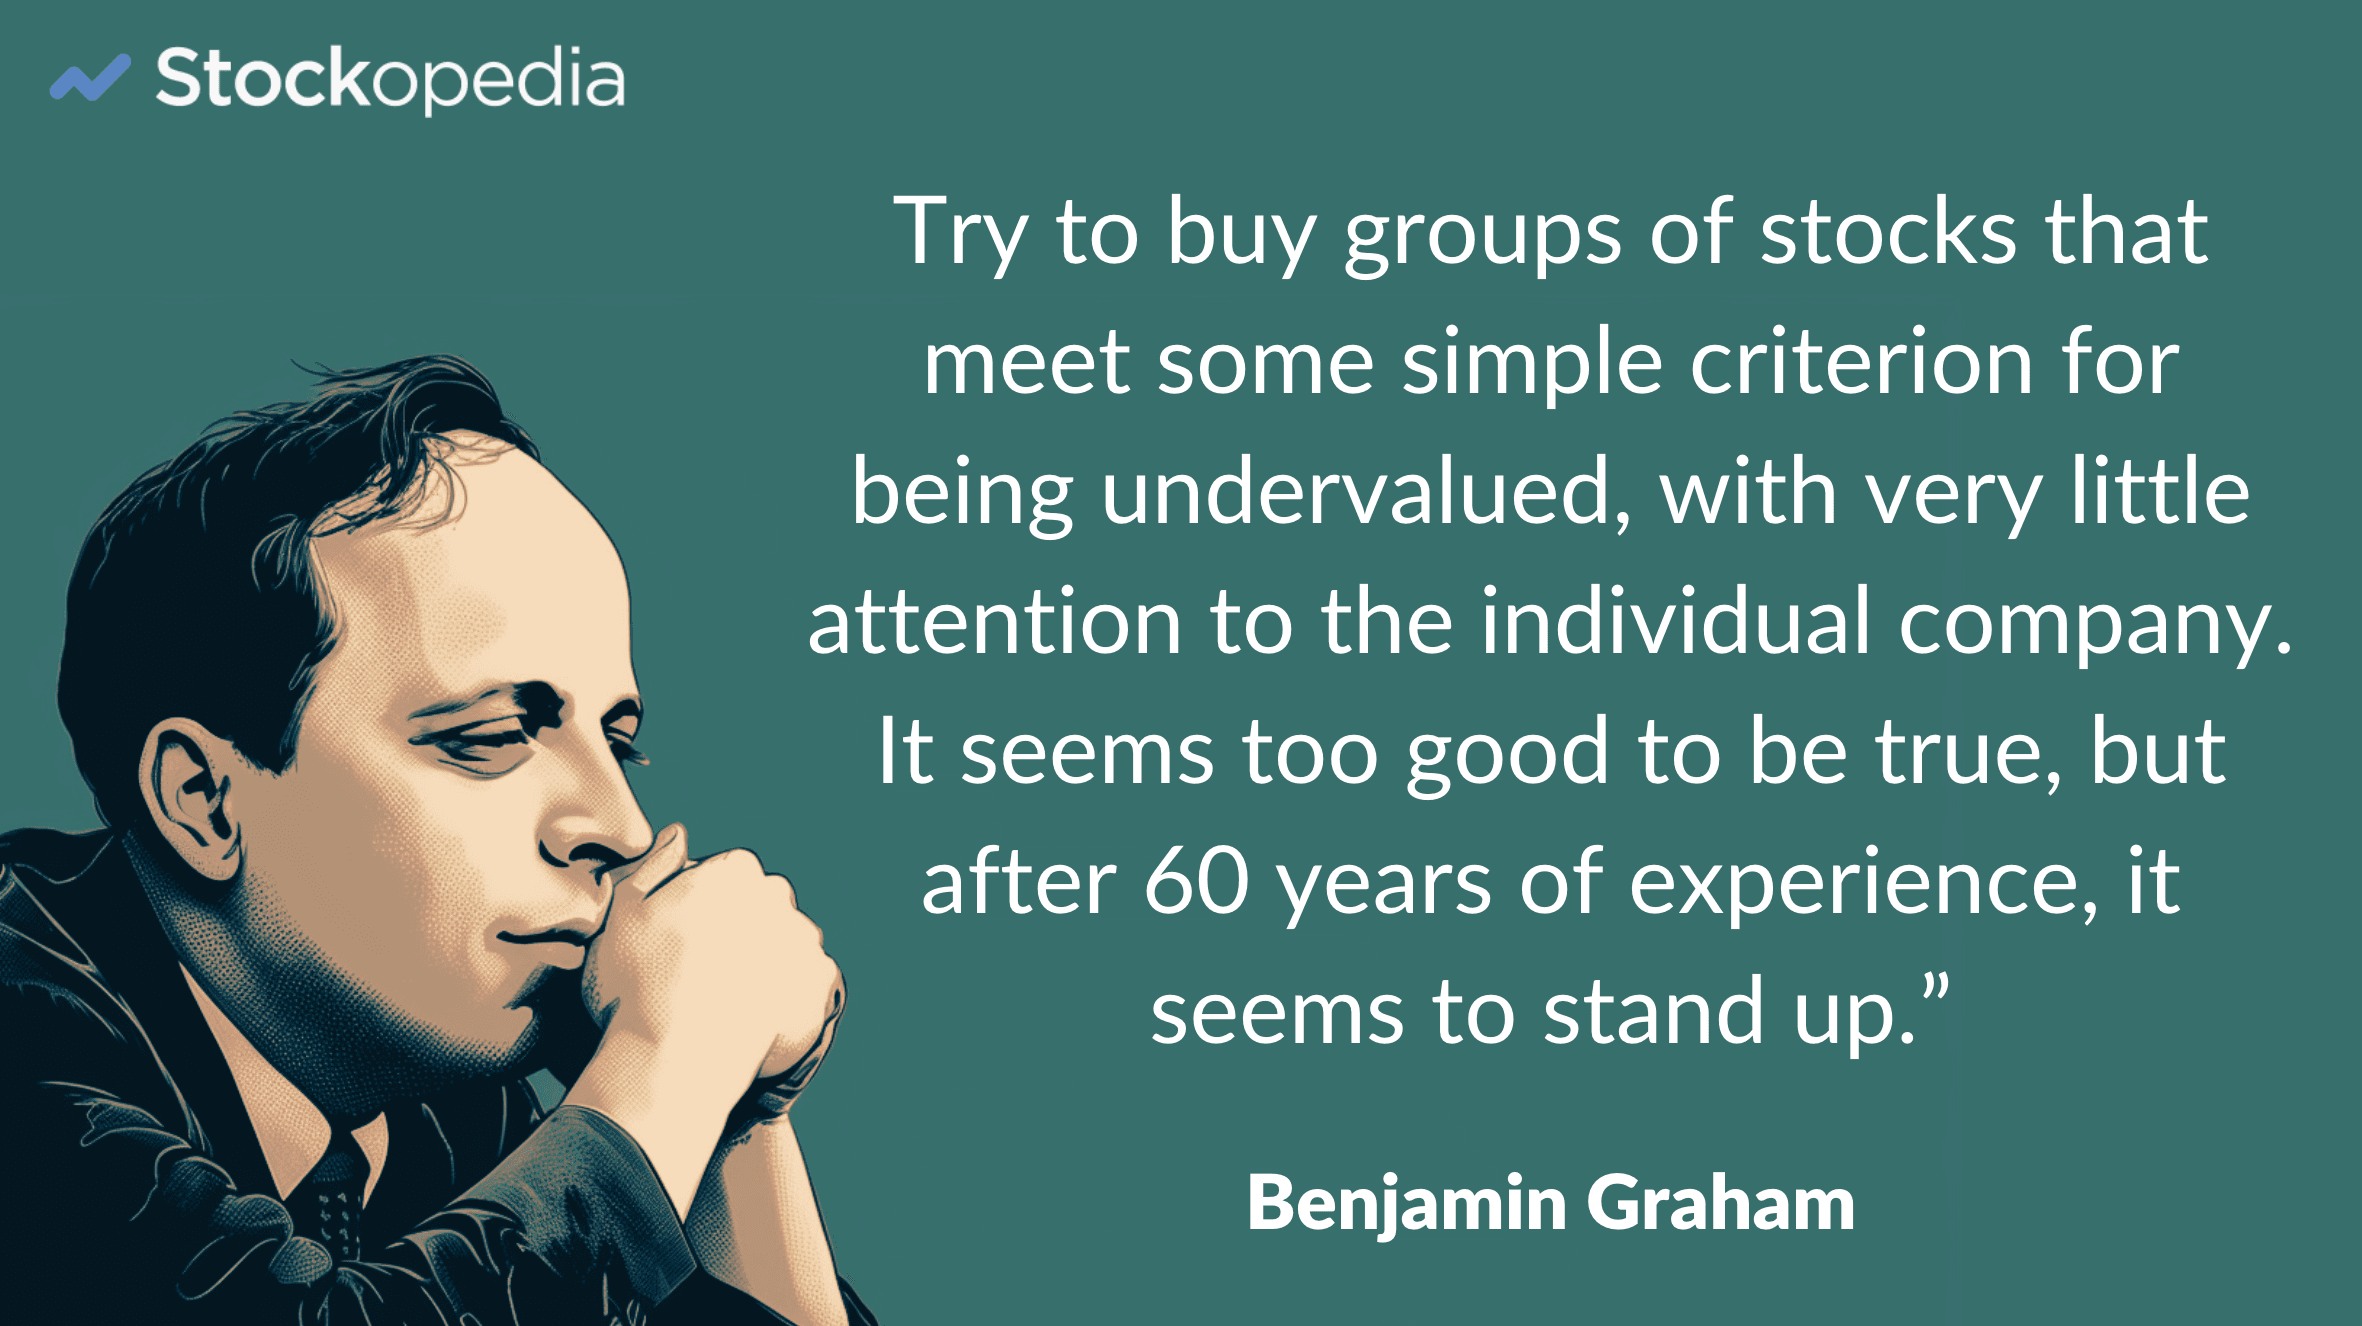 Quote - Ben Graham - buy groups of stocks that are undervalued